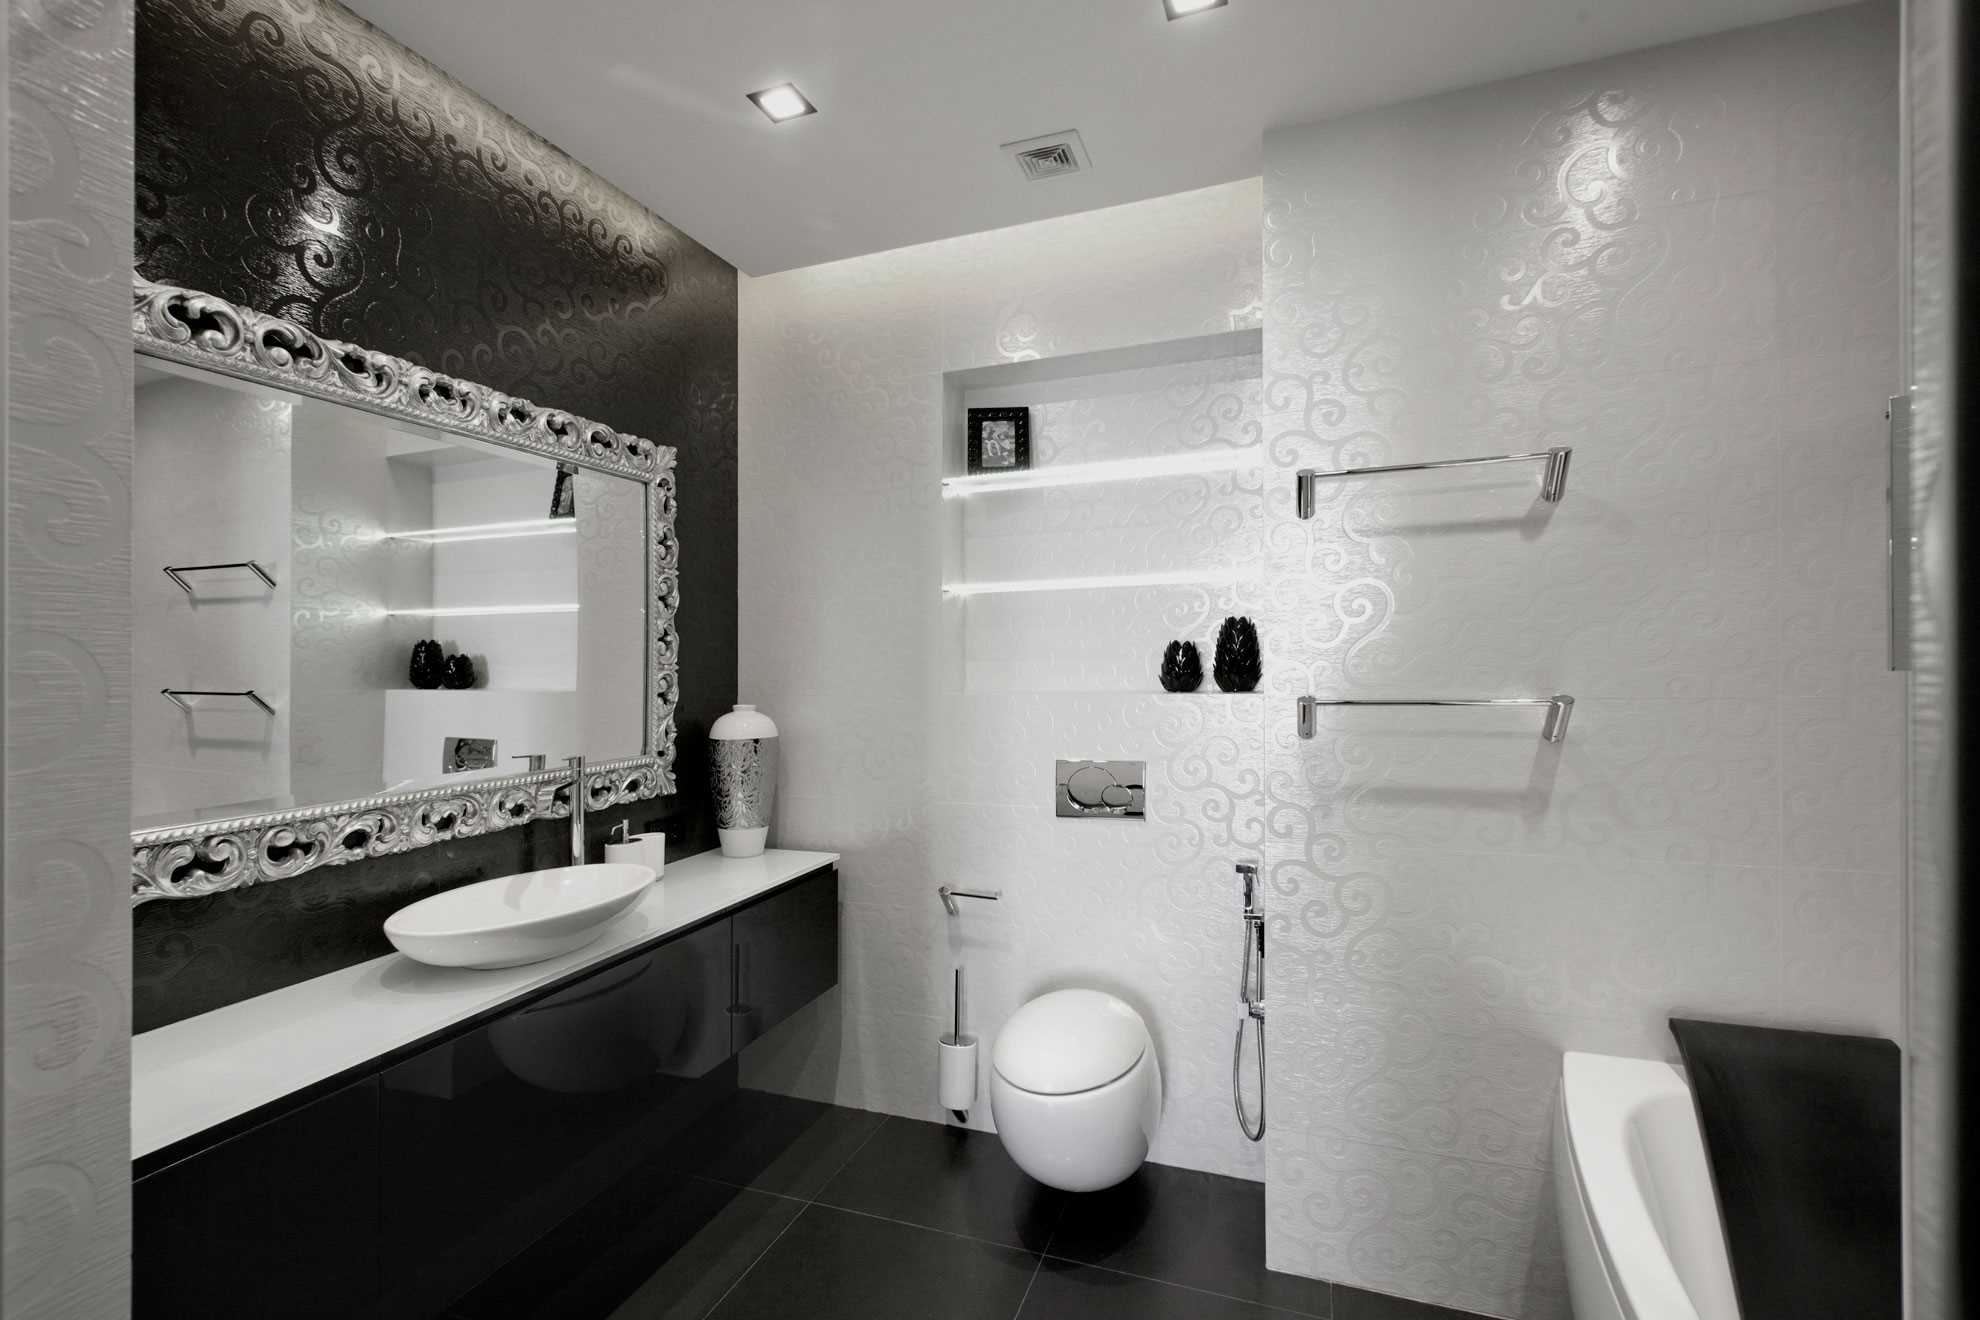 variant of the bright bathroom interior in black and white